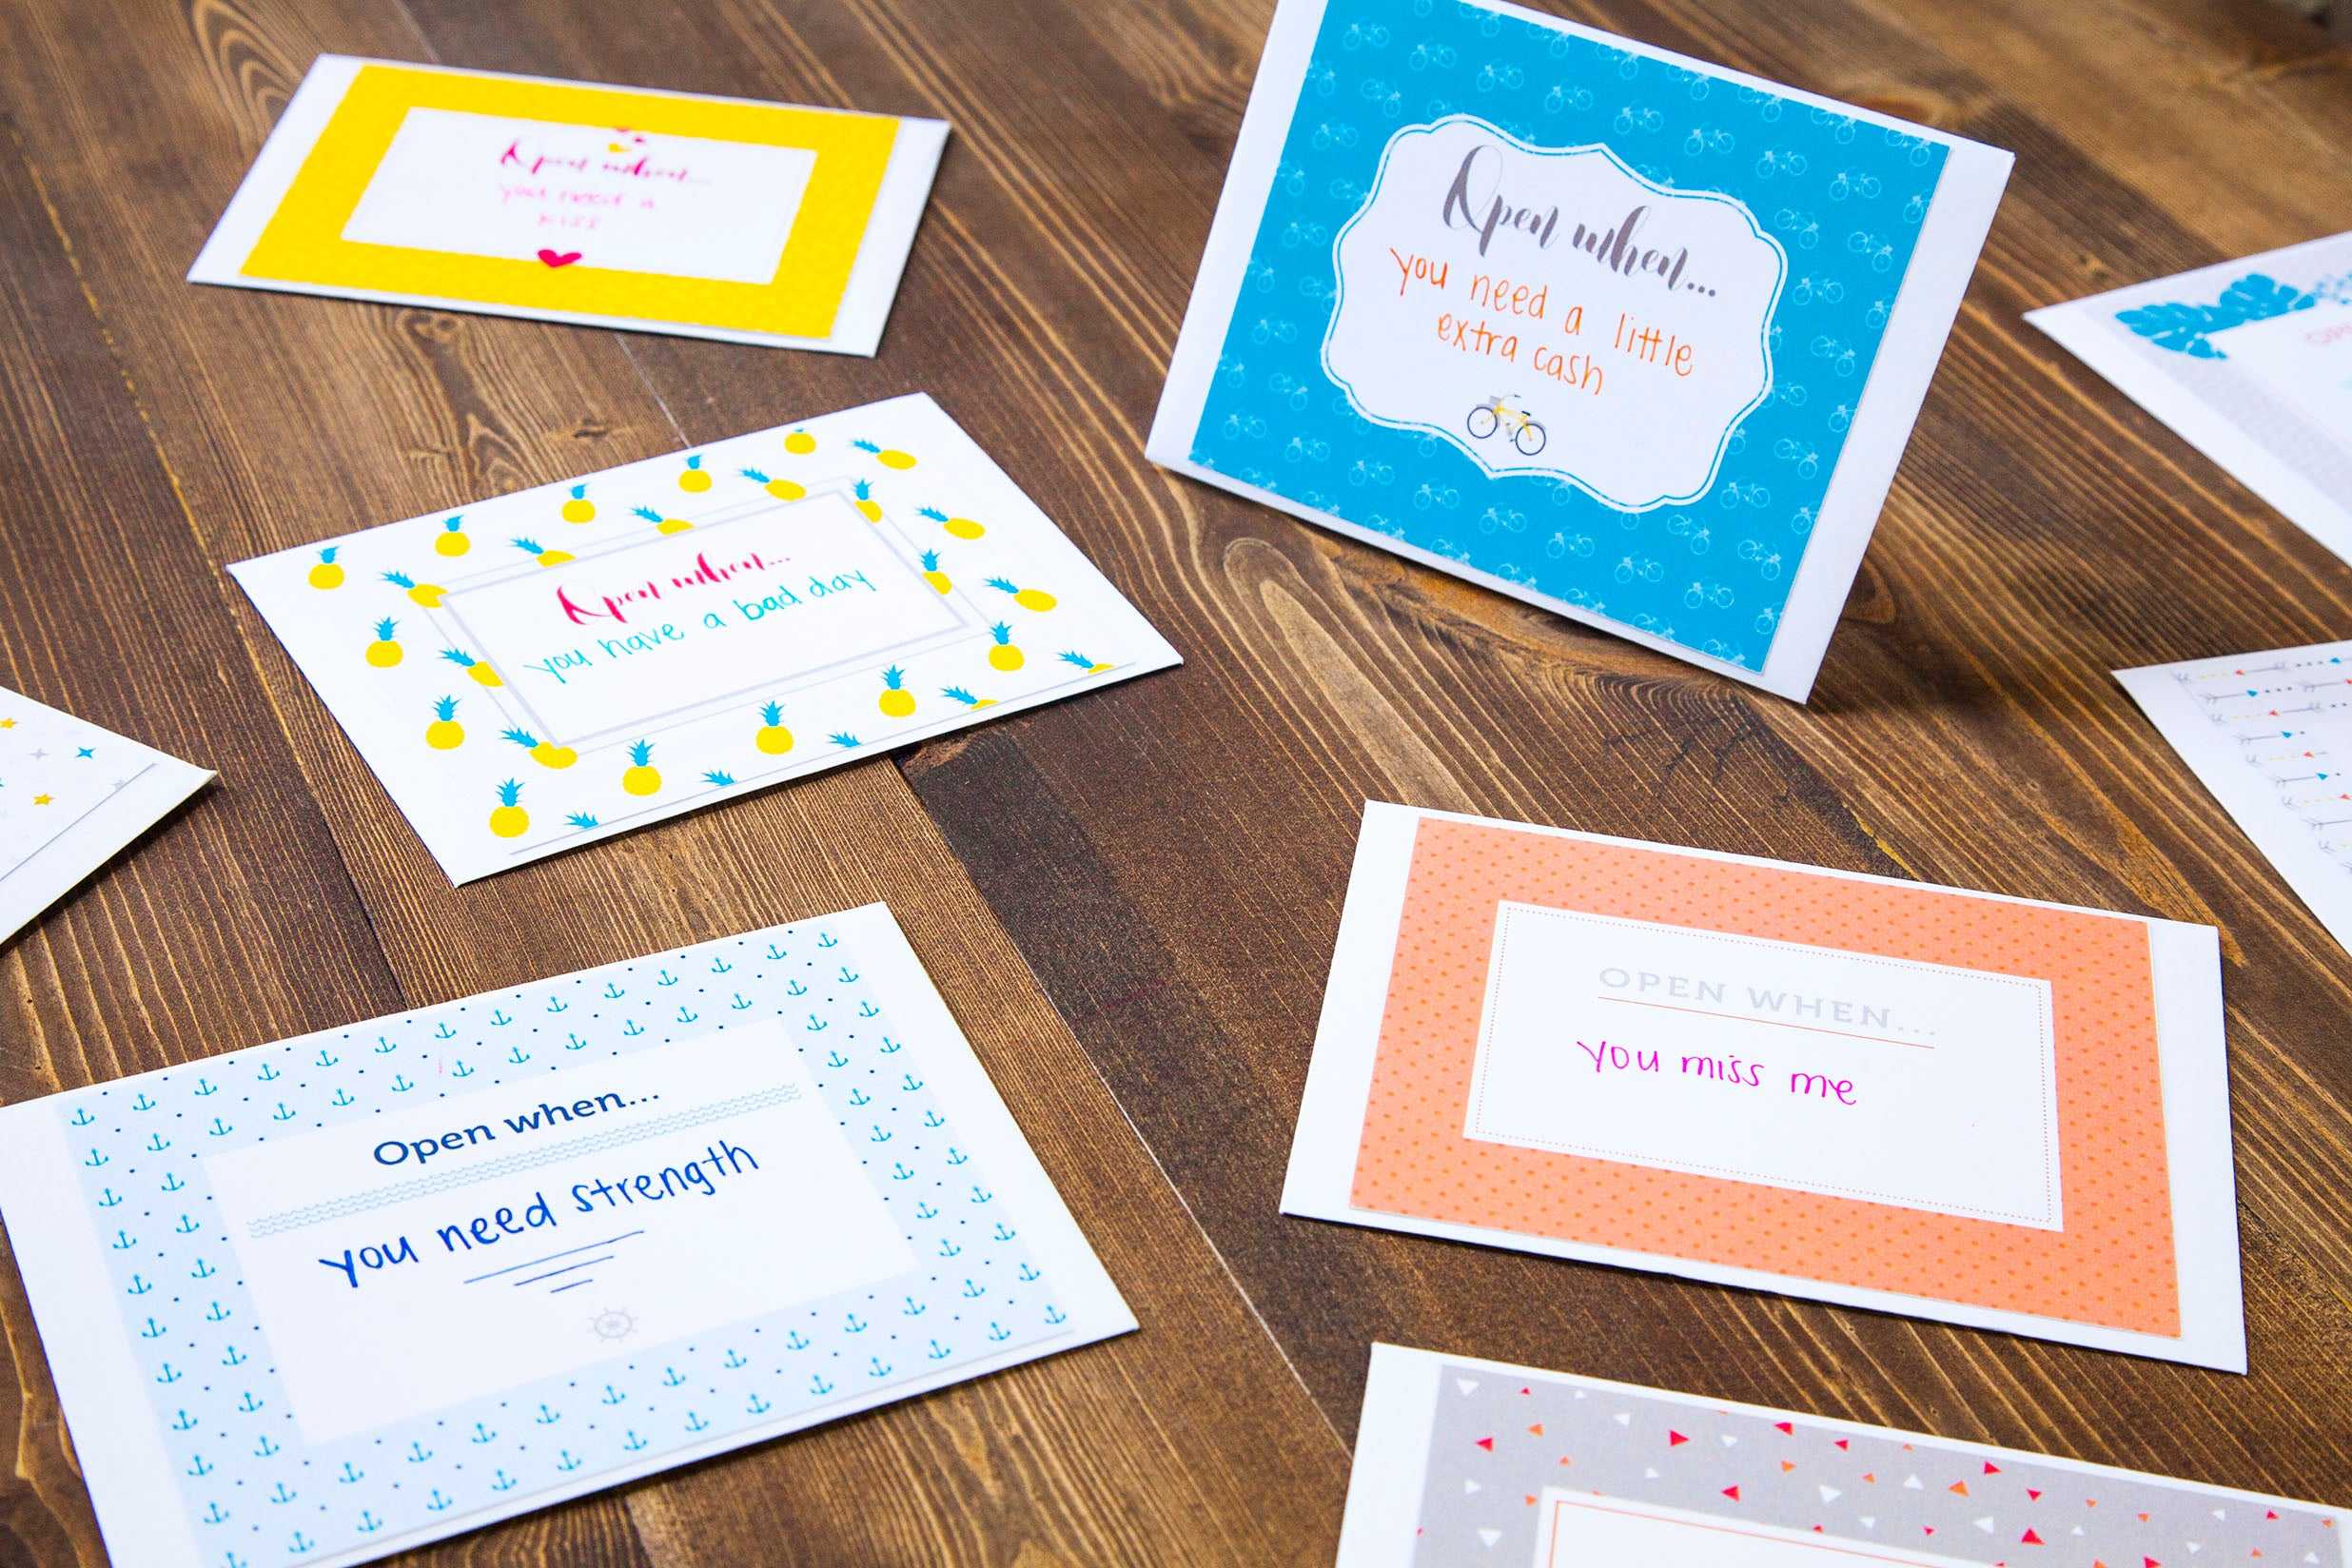 Open When Letters: 280 Ideas + Printables – Shari's Berries Blog Intended For 52 Reasons Why I Love You Cards Templates Free